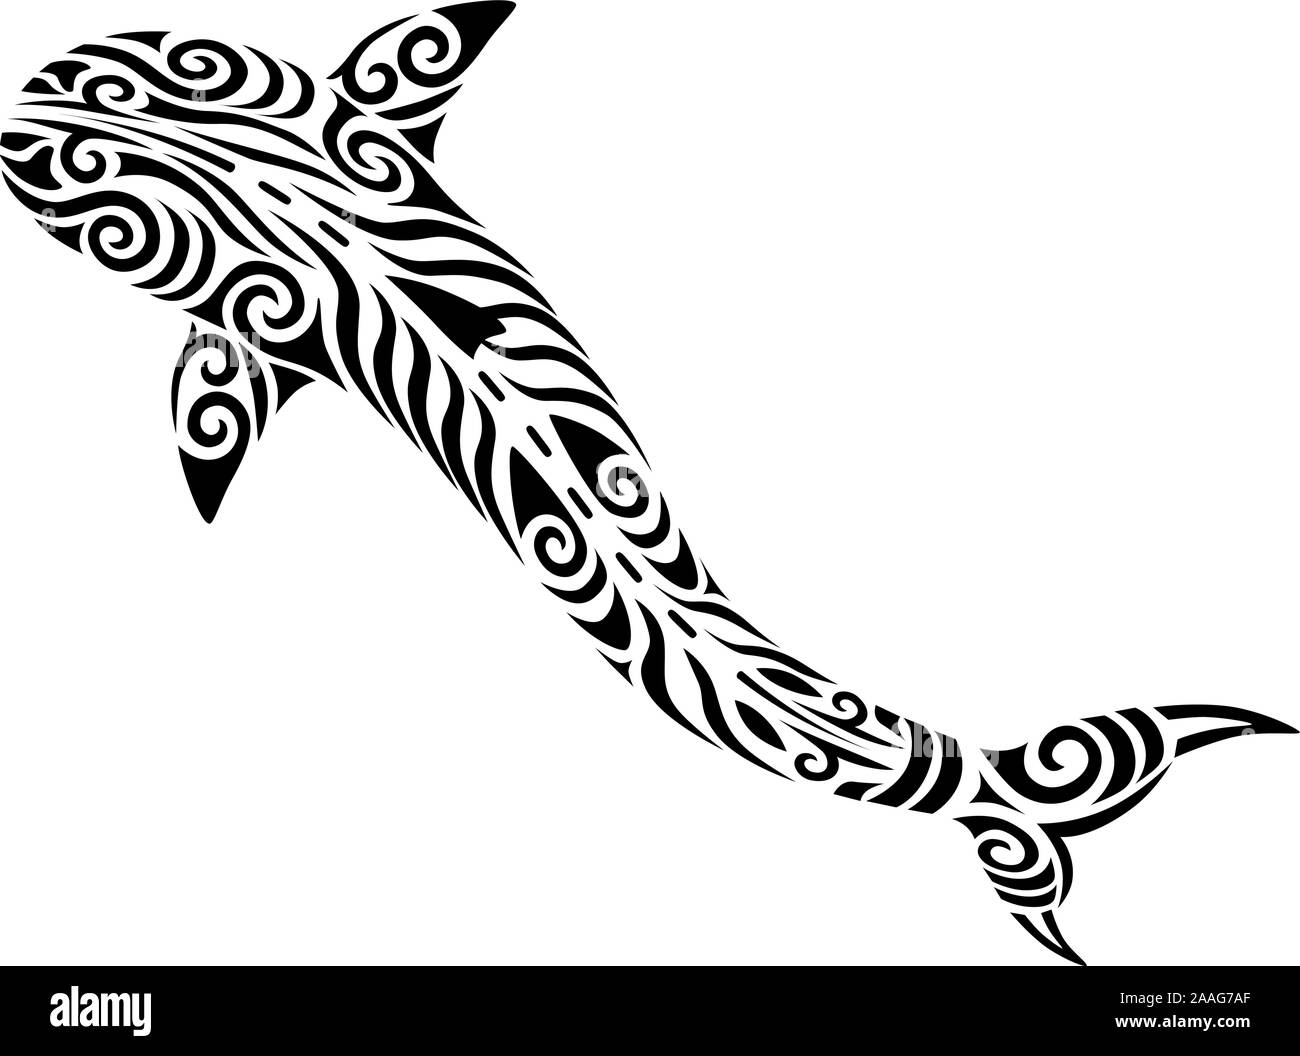 Tribal Fish Tattoo Vector Images over 1200